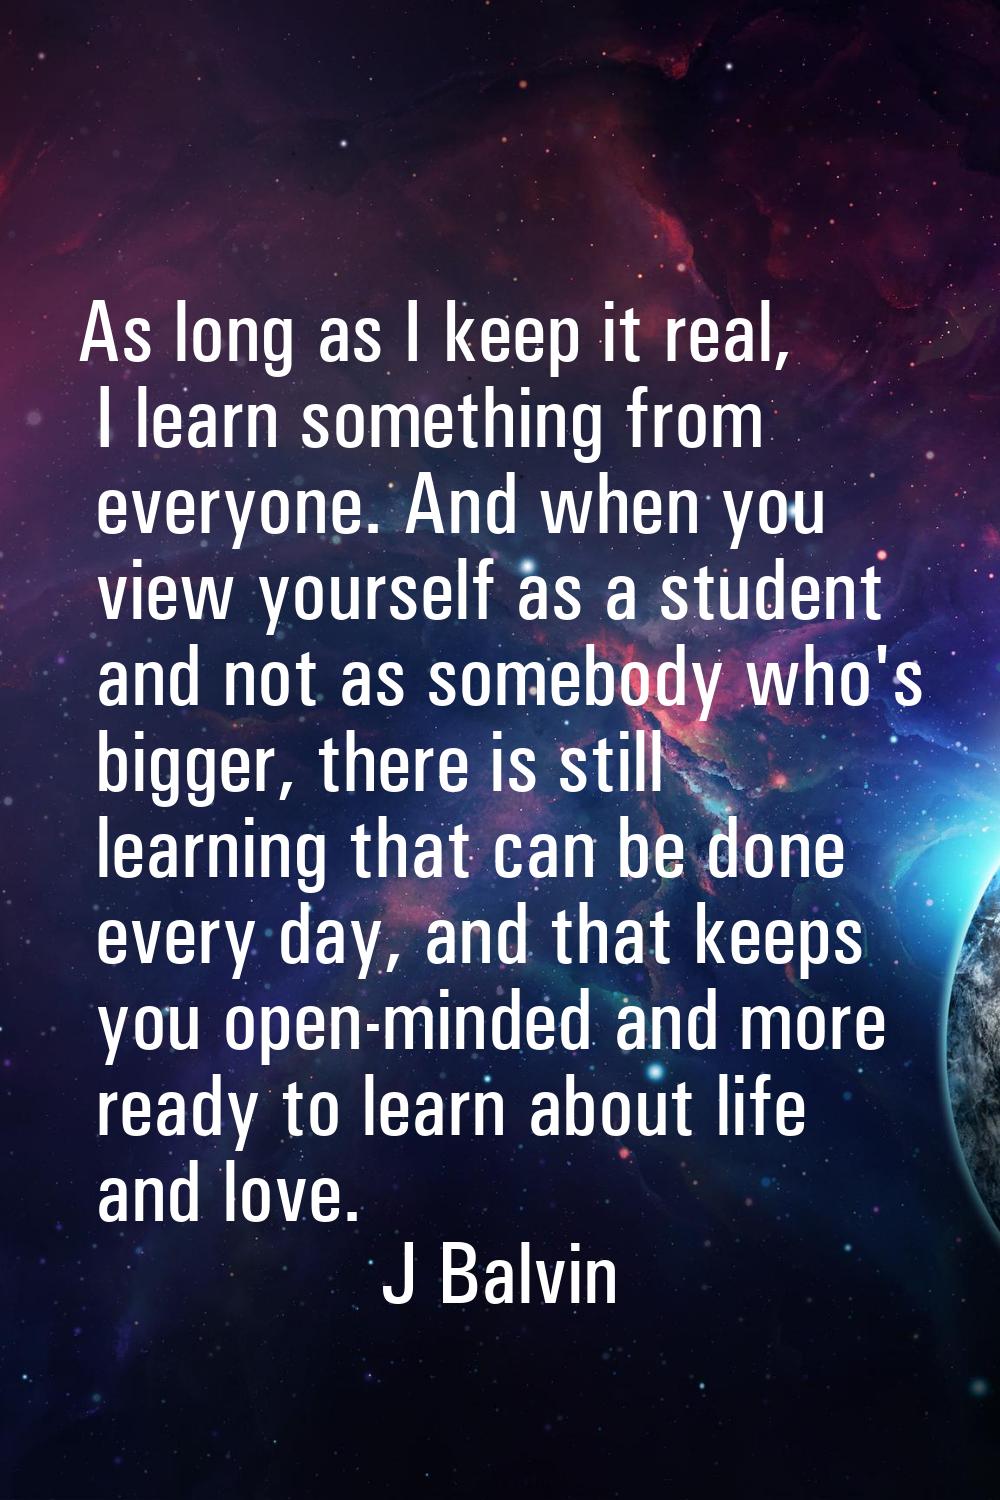 As long as I keep it real, I learn something from everyone. And when you view yourself as a student